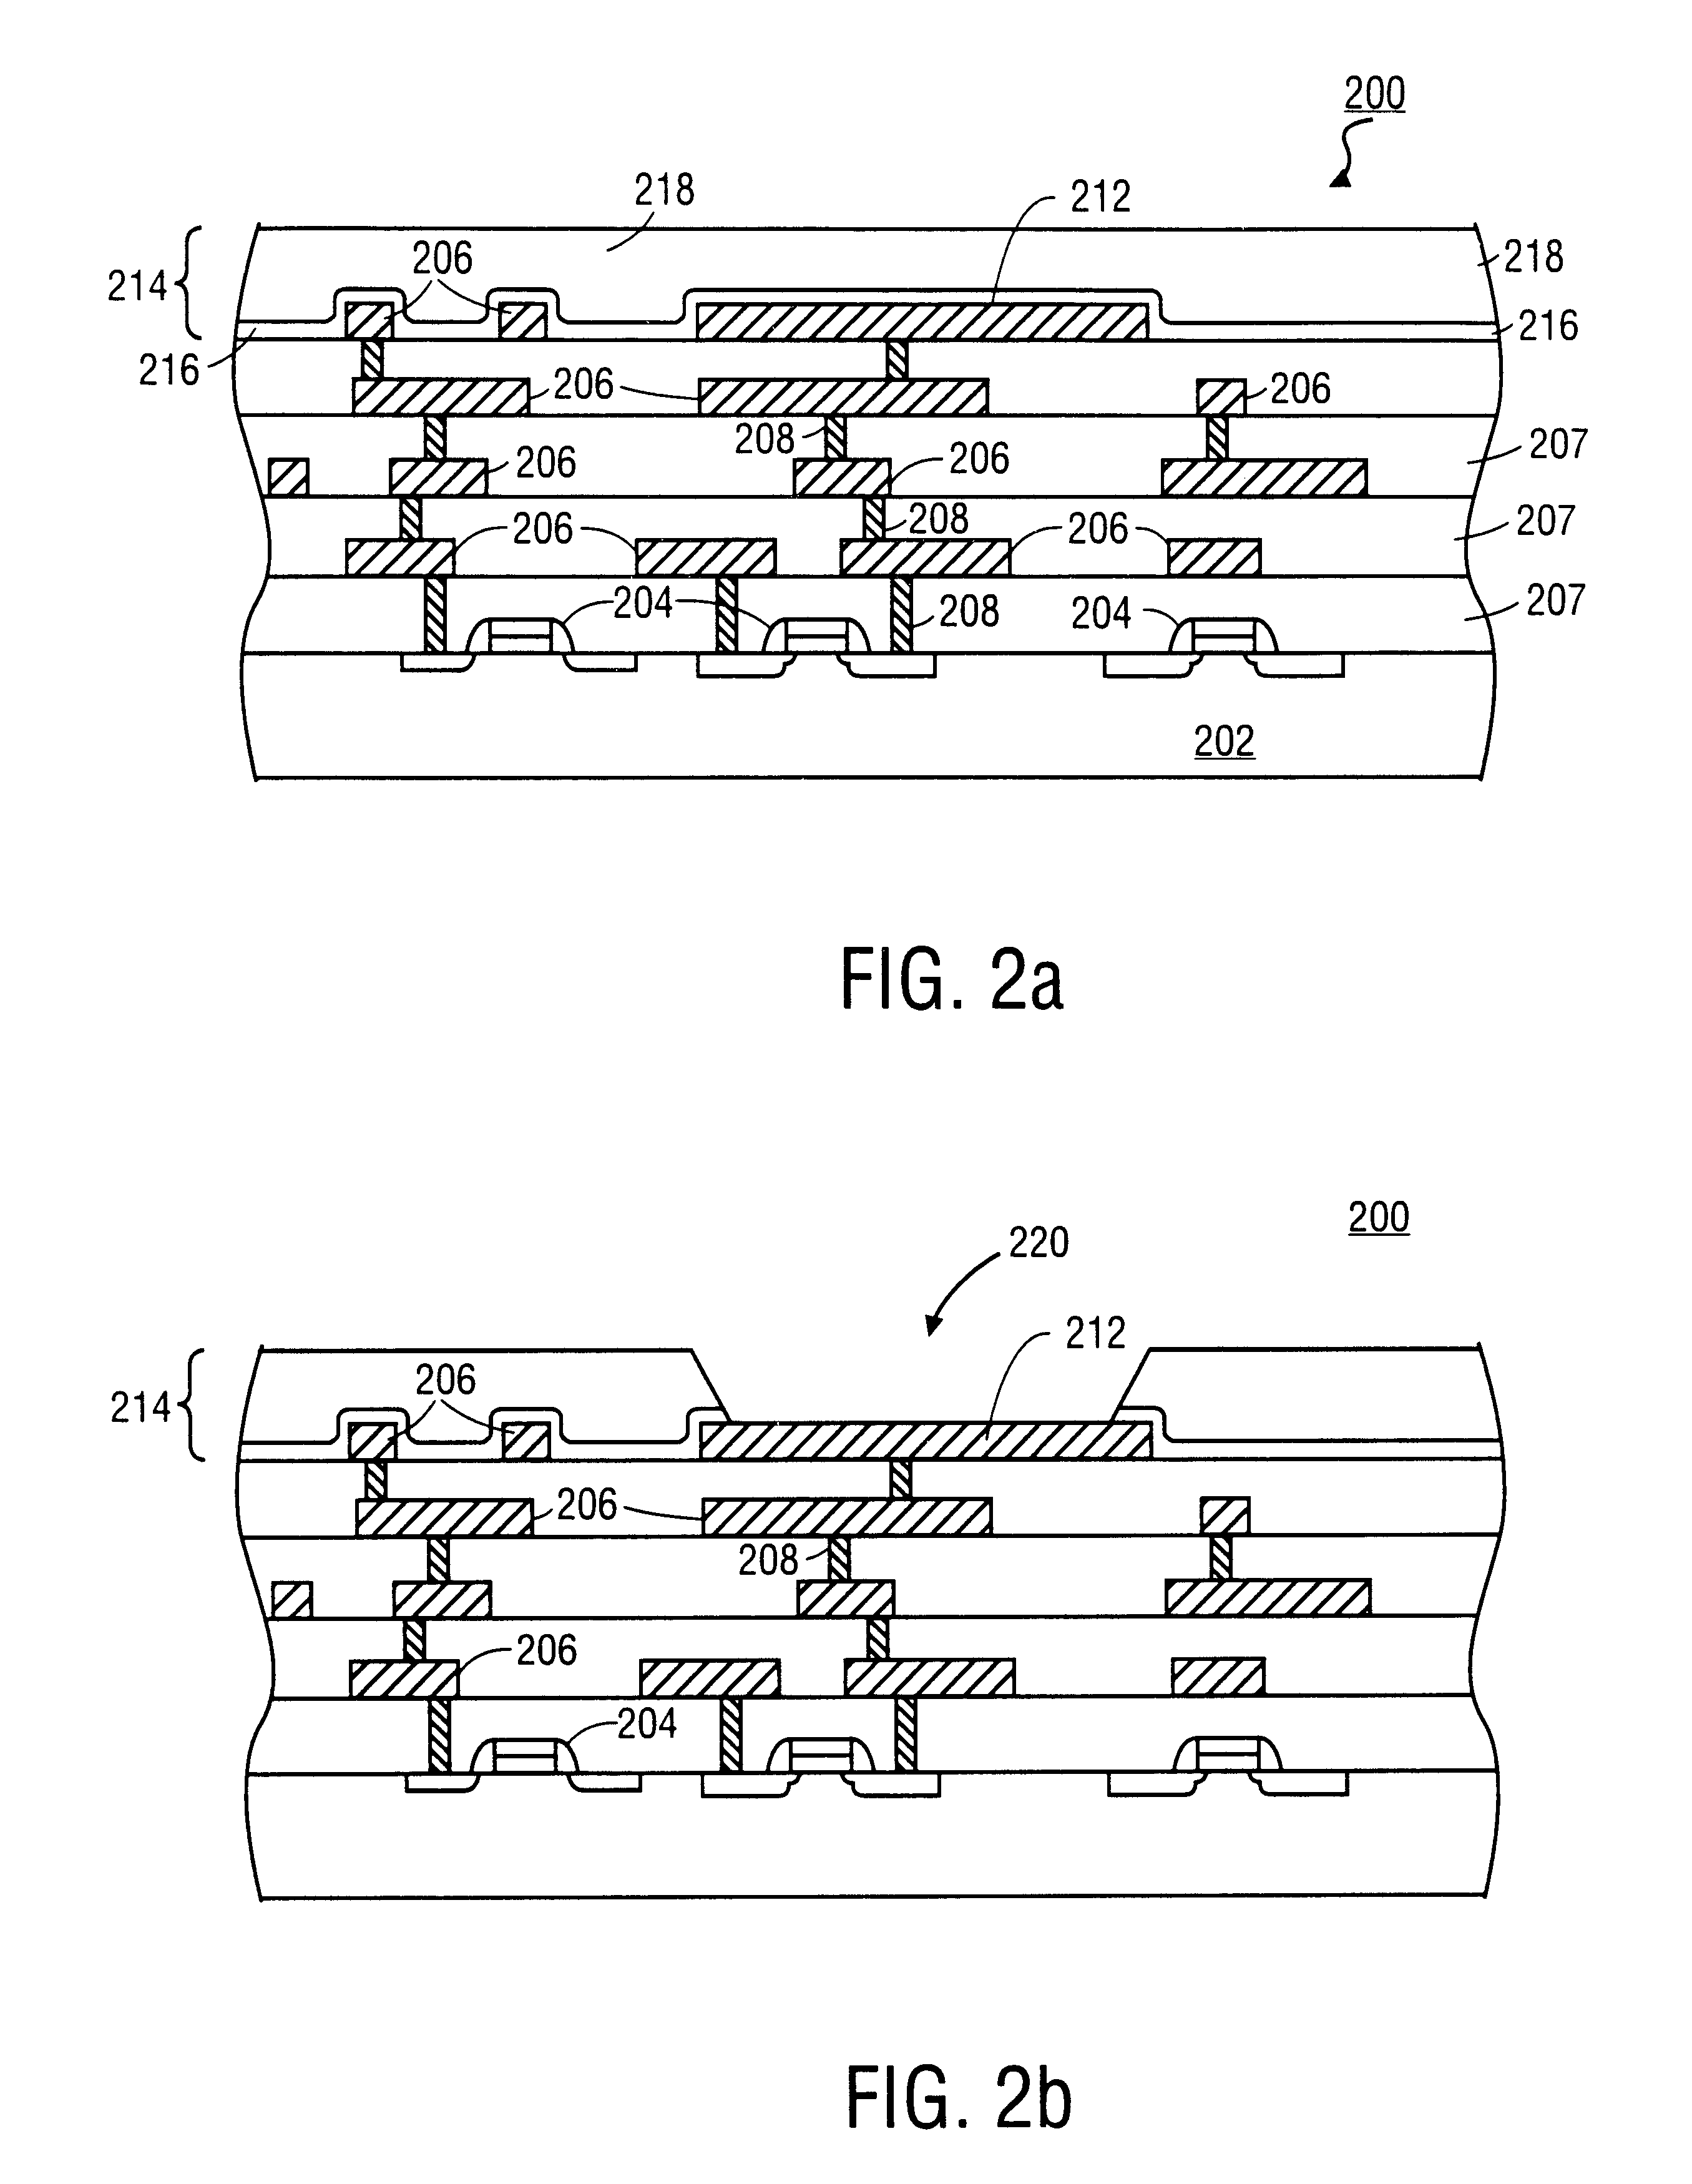 Ball limiting metallurgy for input/outputs and methods of fabrication